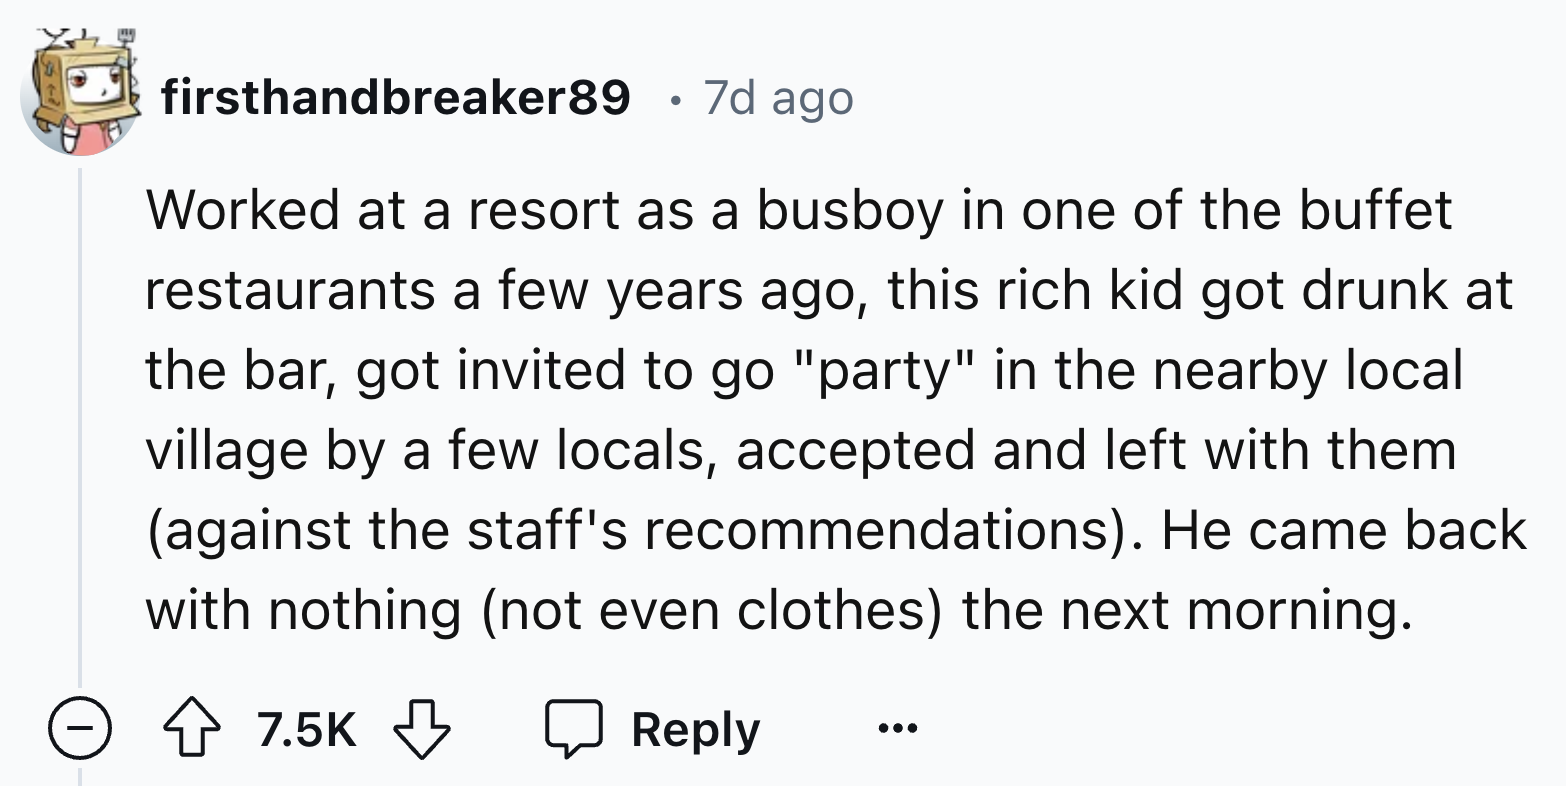 number - firsthandbreaker89 . 7d ago Worked at a resort as a busboy in one of the buffet restaurants a few years ago, this rich kid got drunk at the bar, got invited to go "party" in the nearby local village by a few locals, accepted and left with them ag